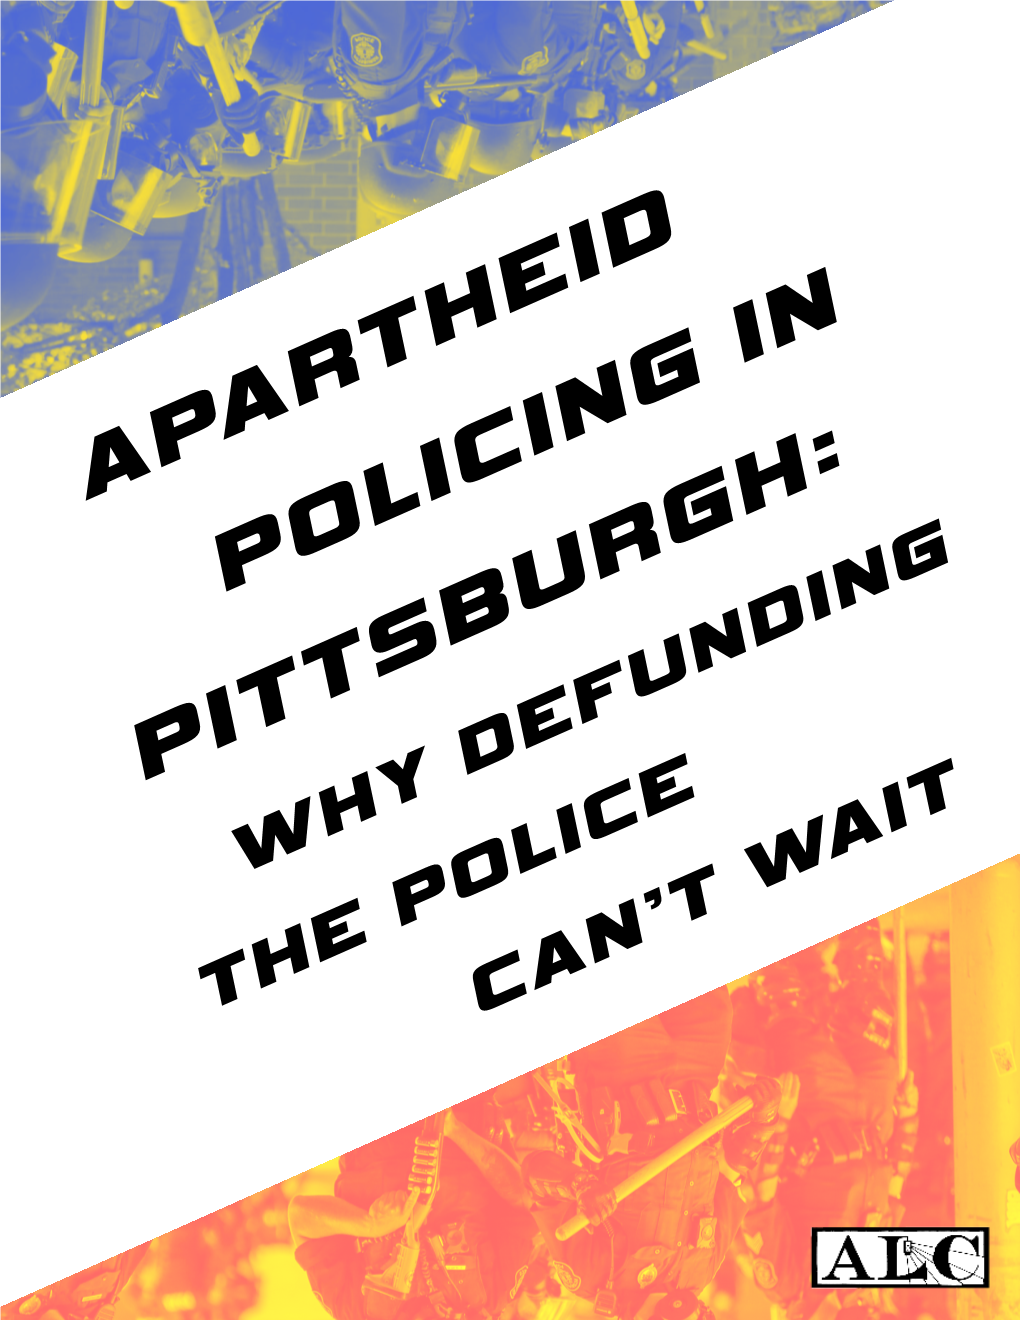 Apartheid Policing in Pittsburgh